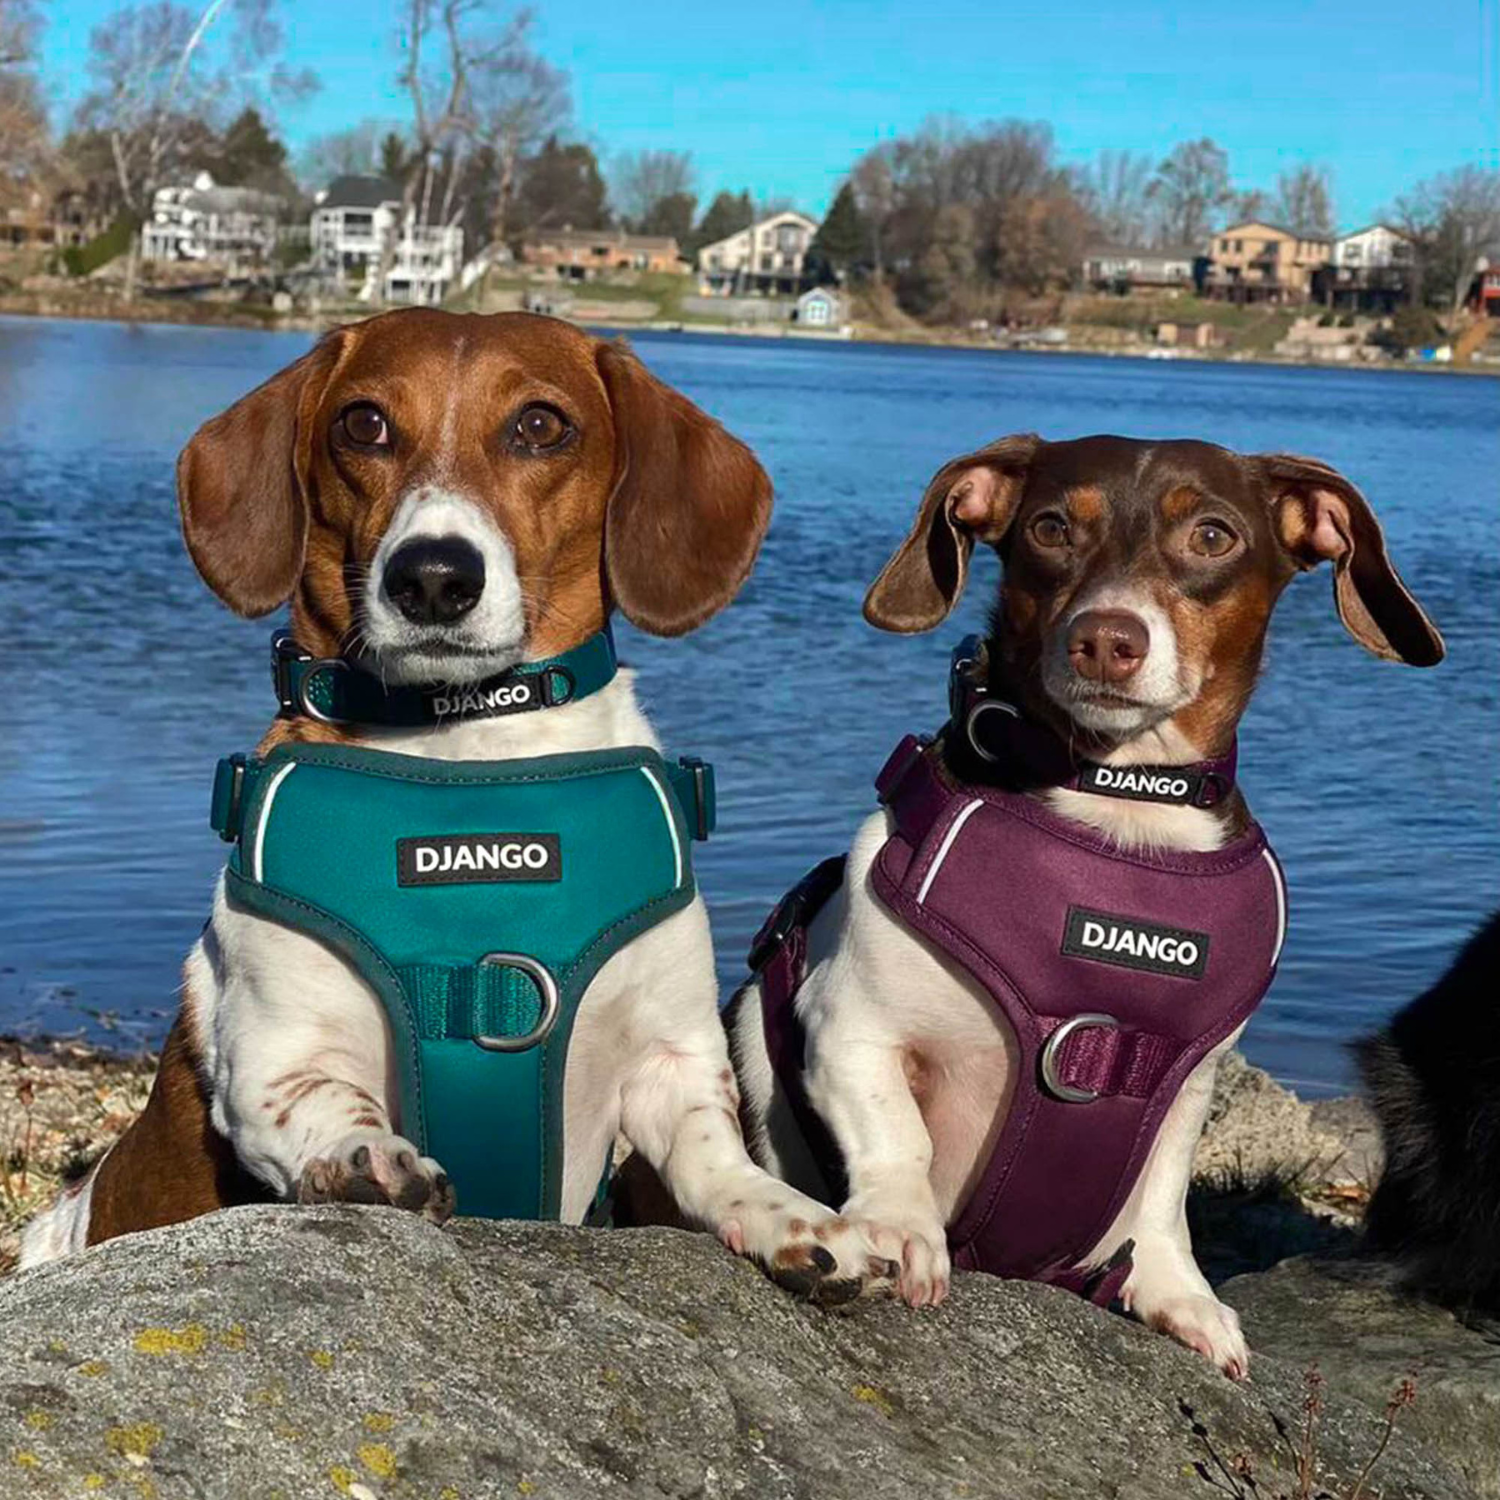 Dachshunds Myles and Willow are wearing their DJANGO Tahoe No Pull Dog Harnesses in Dark Teal Green and Raspberry Purple. Every DJANGO Tahoe Collection order gives back to Lake Tahoe and the beautiful surrounding terrain - djangobrand.com